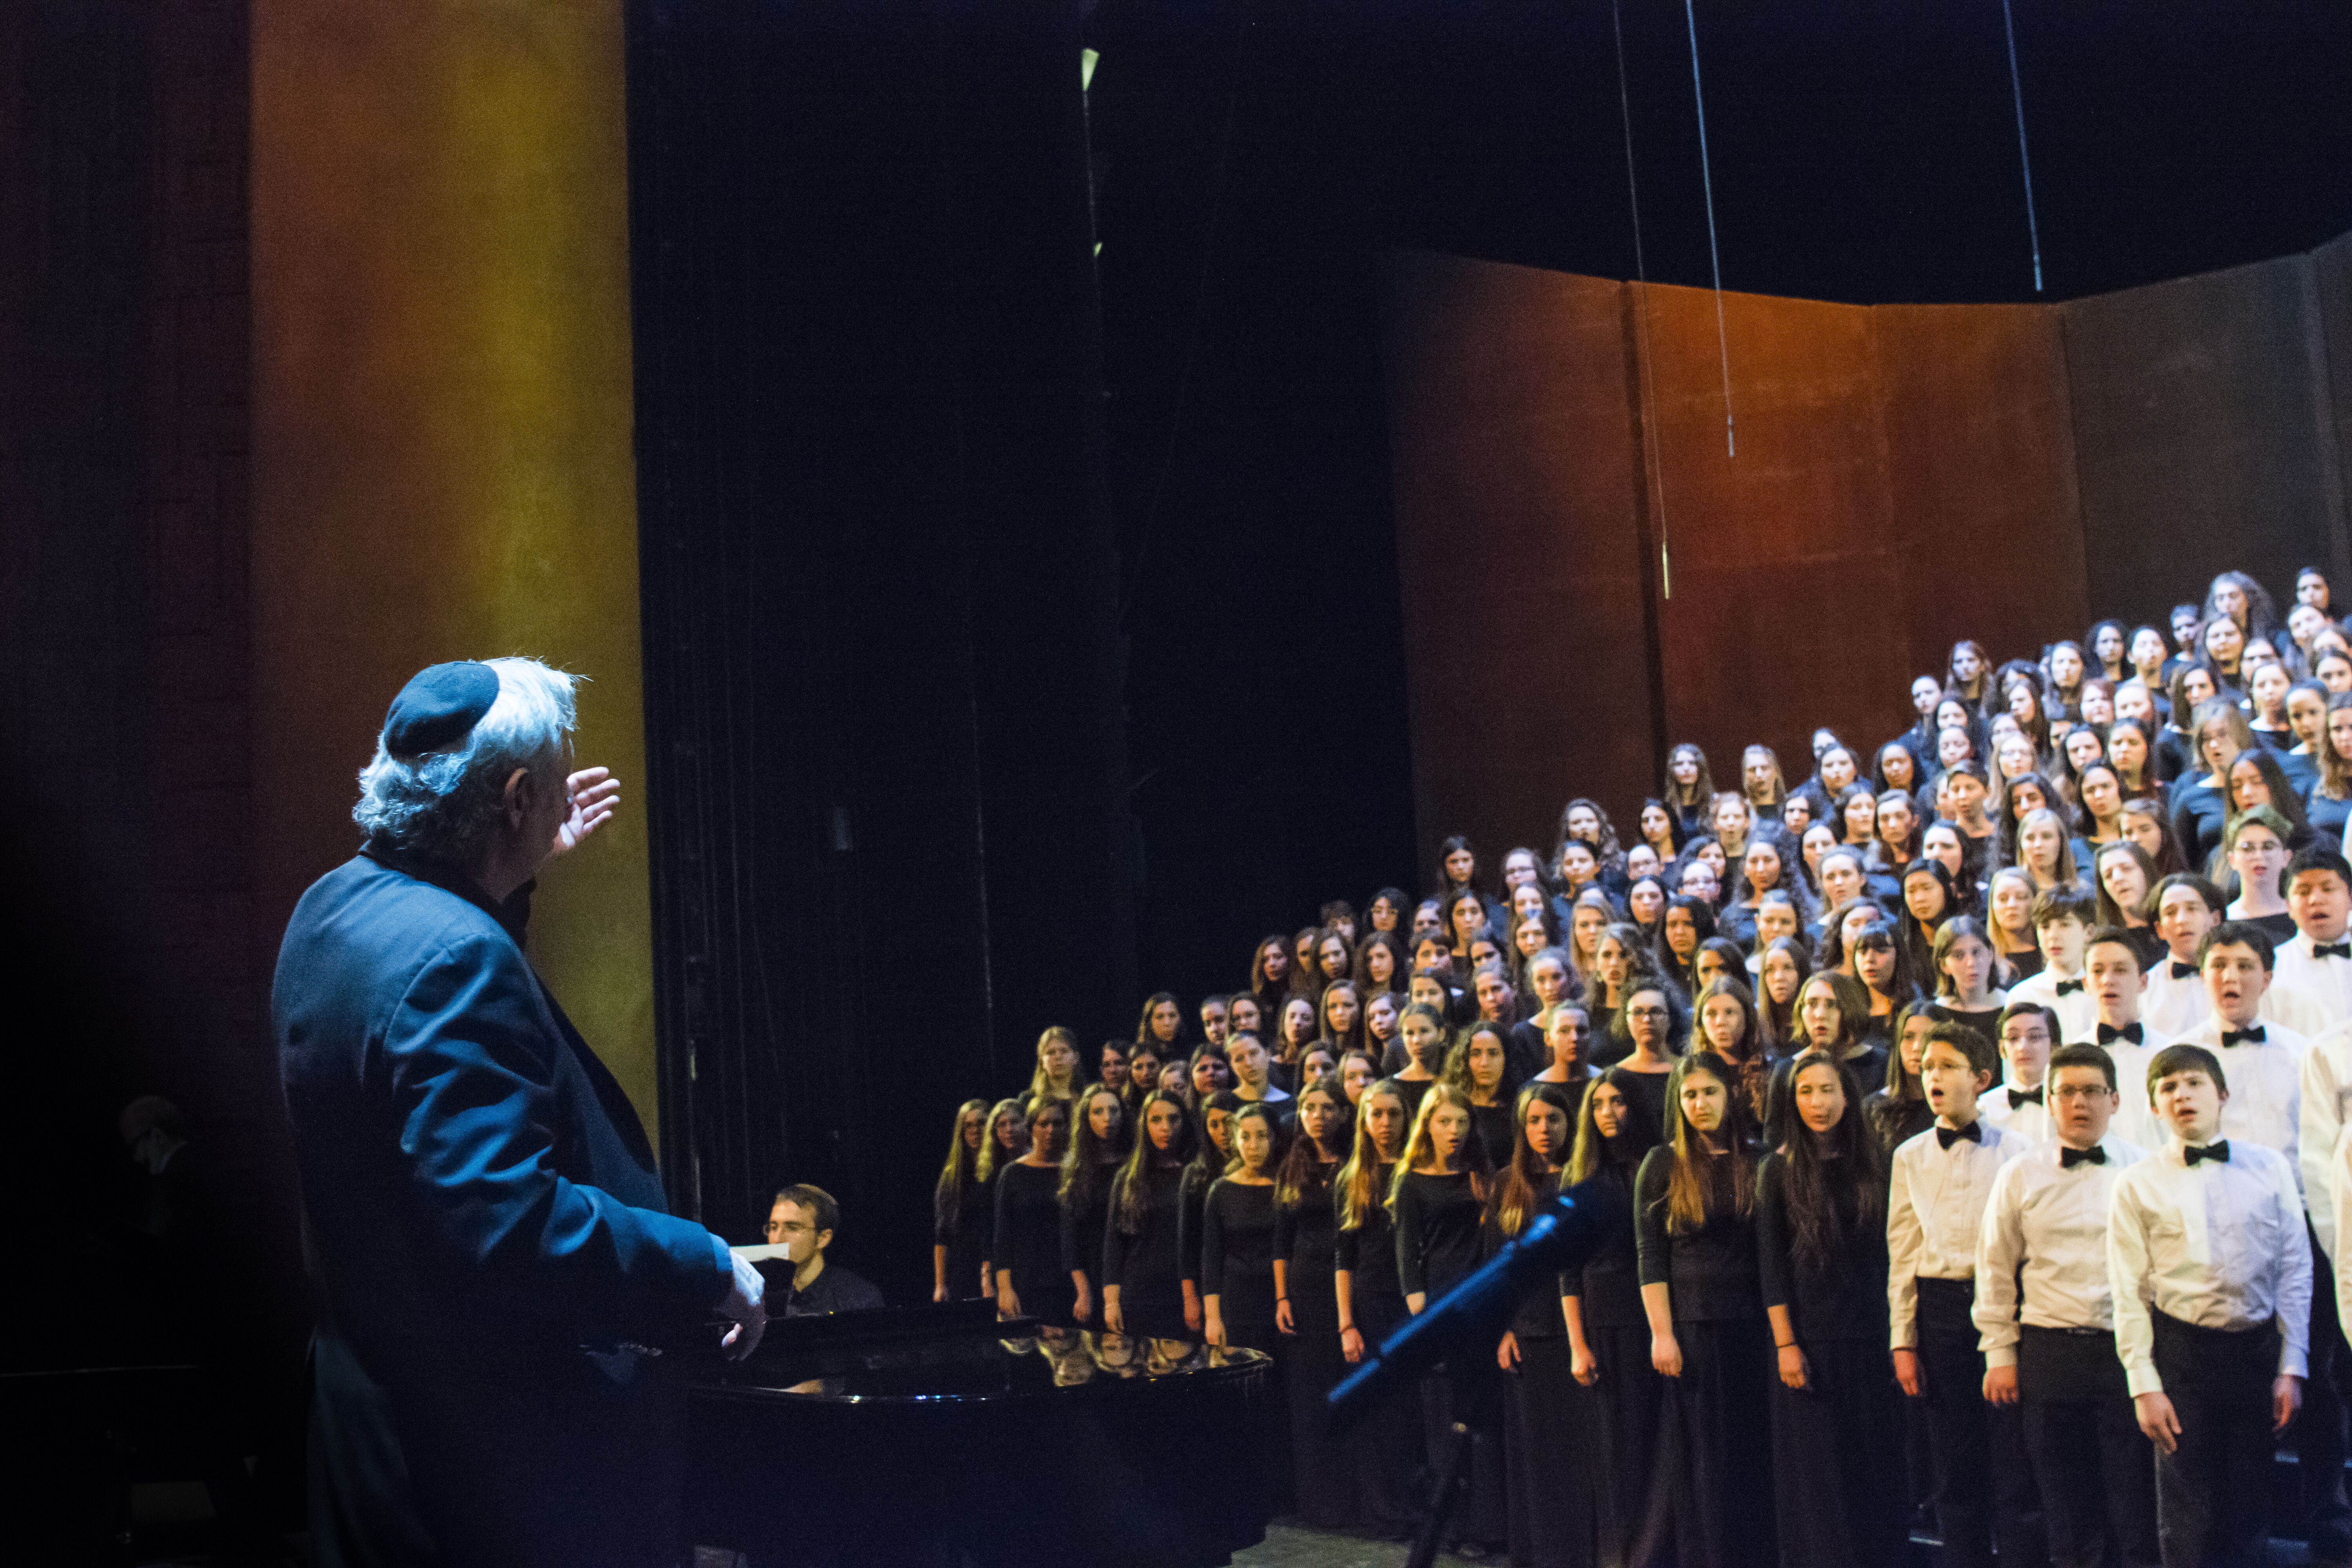 HaZamir International Jewish Teen Choir Celebrates 30 Years of Bringing Together Young People from America and Israel through Song